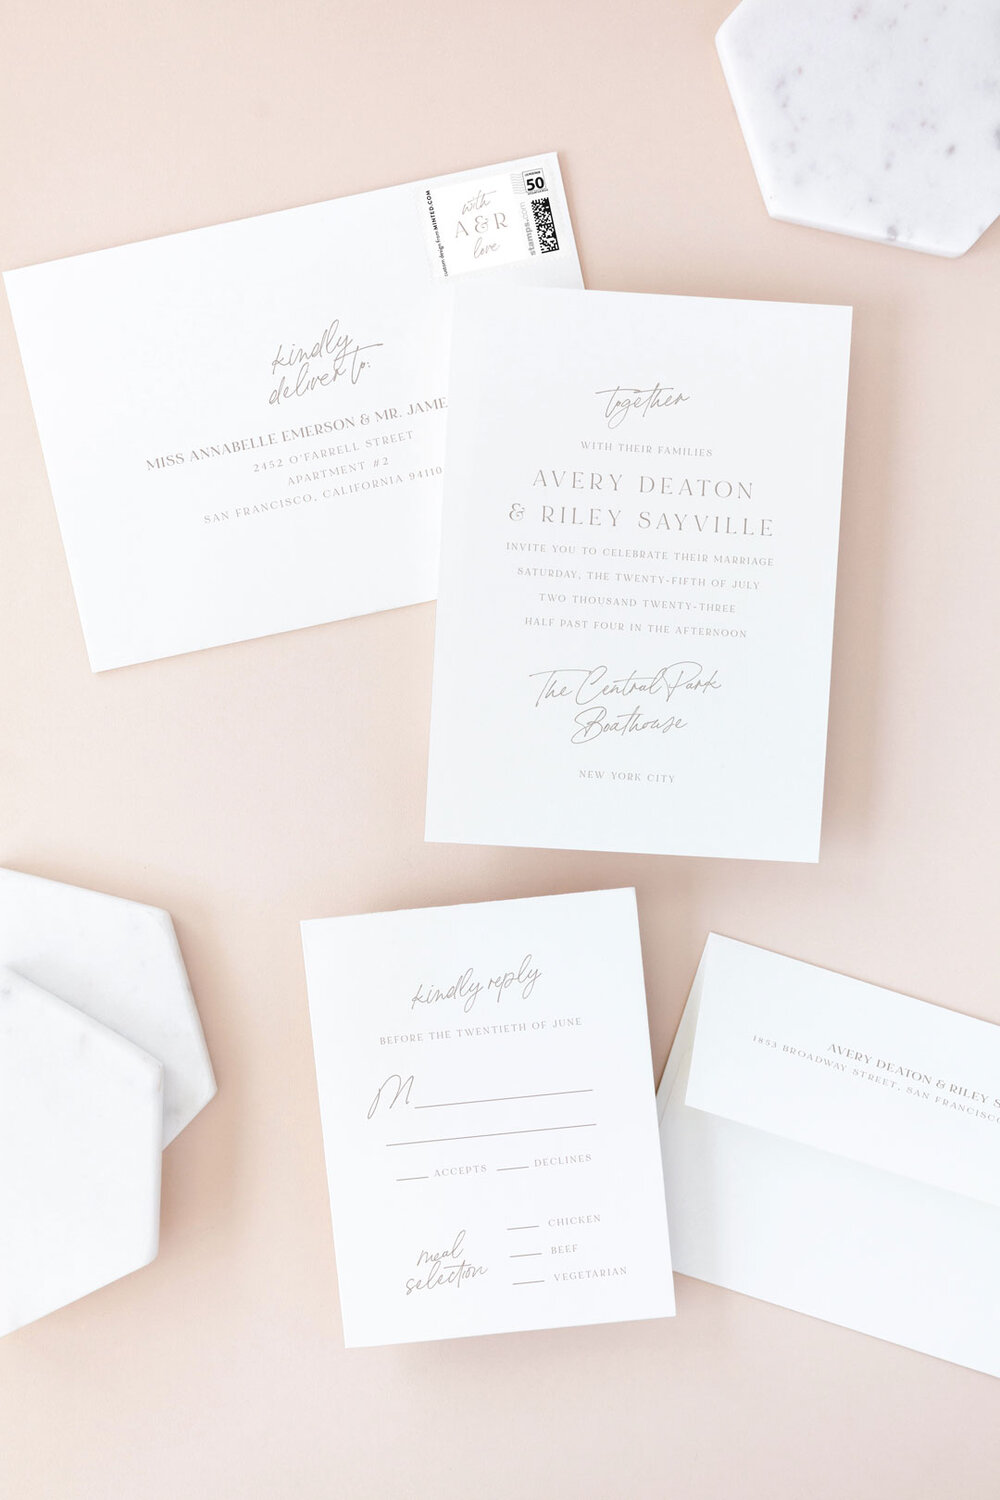 Minted Composure Tan and White Formal Wedding invitation by Jackie Mangiolino